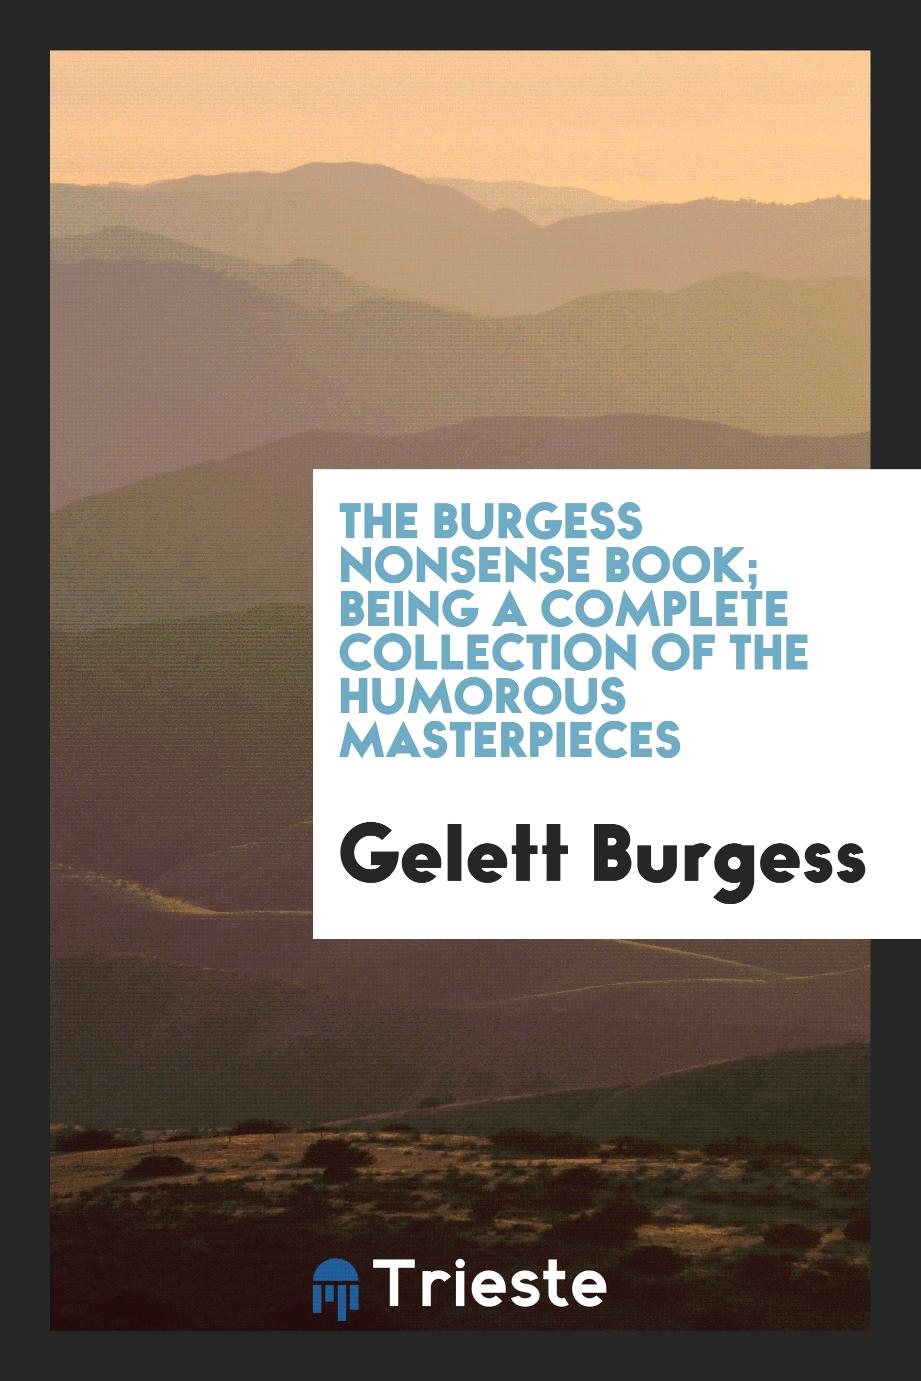 The Burgess nonsense book; being a complete collection of the humorous masterpieces